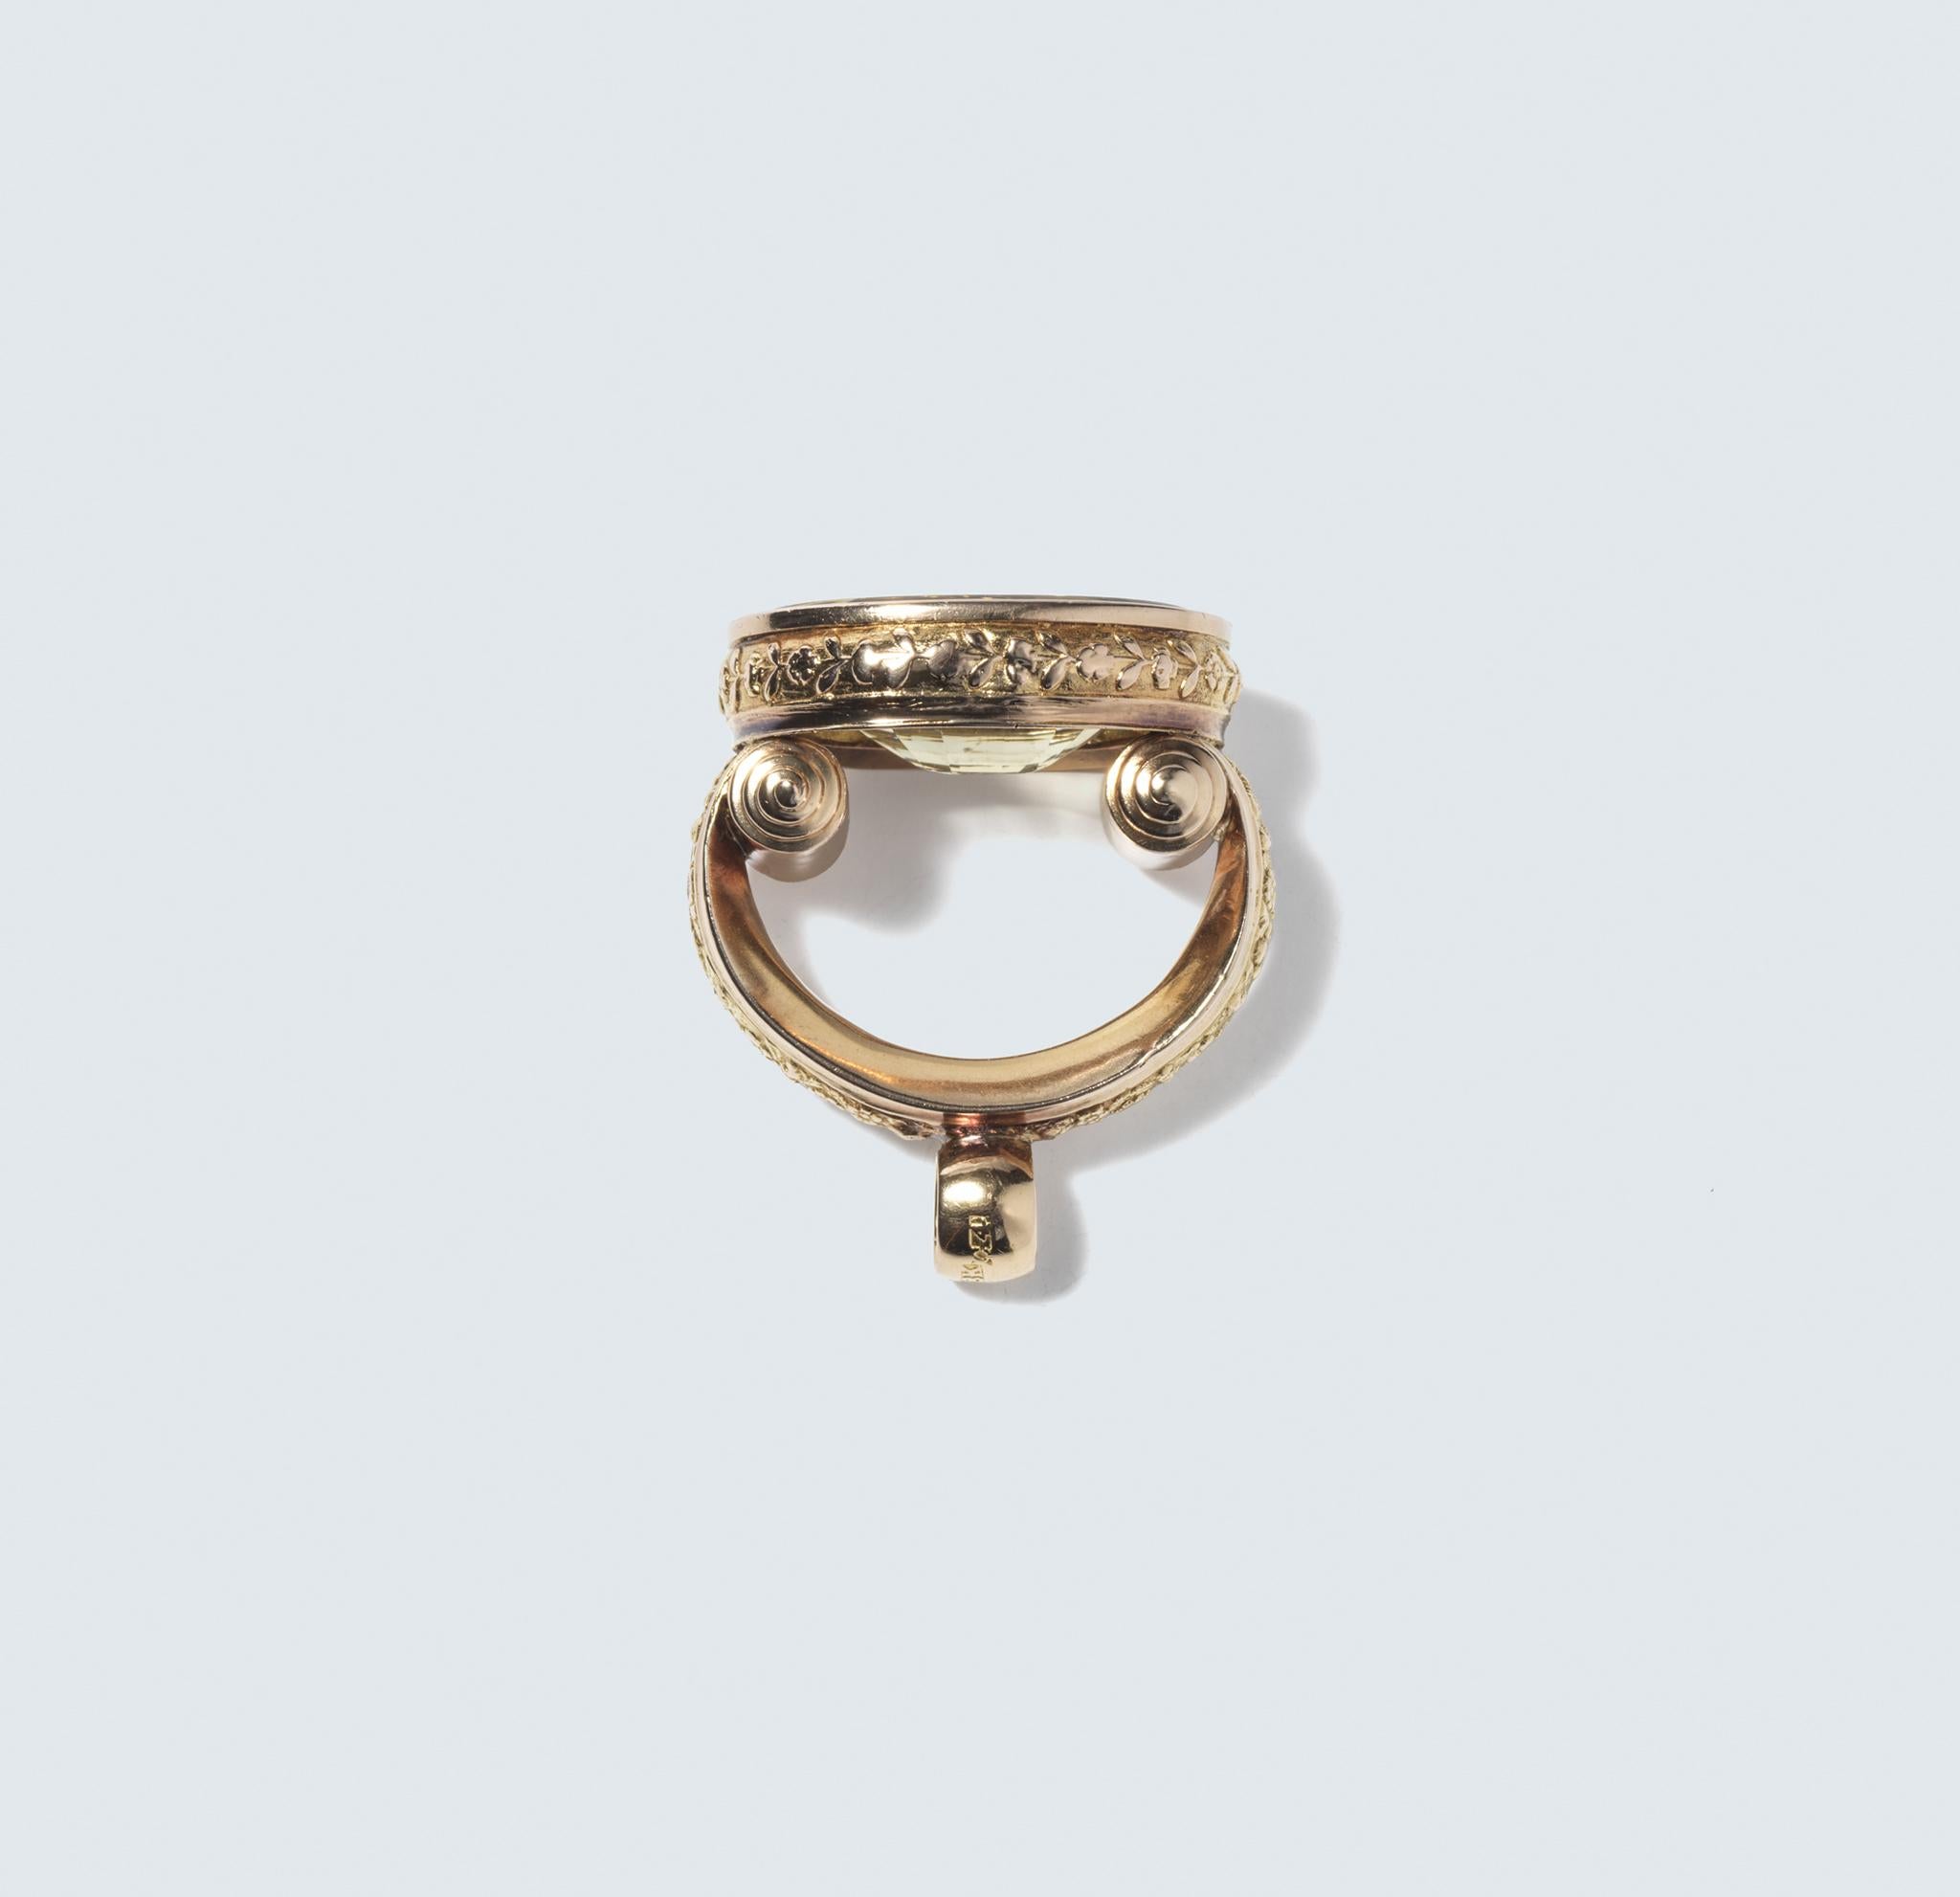 This ring boasts an 18 karat gold setting with a large, oval-shaped citrine stone as its centerpiece. The citrine is faceted, giving it a multi-dimensional surface that catches and reflects light. The gold that encases the citrine is textured,